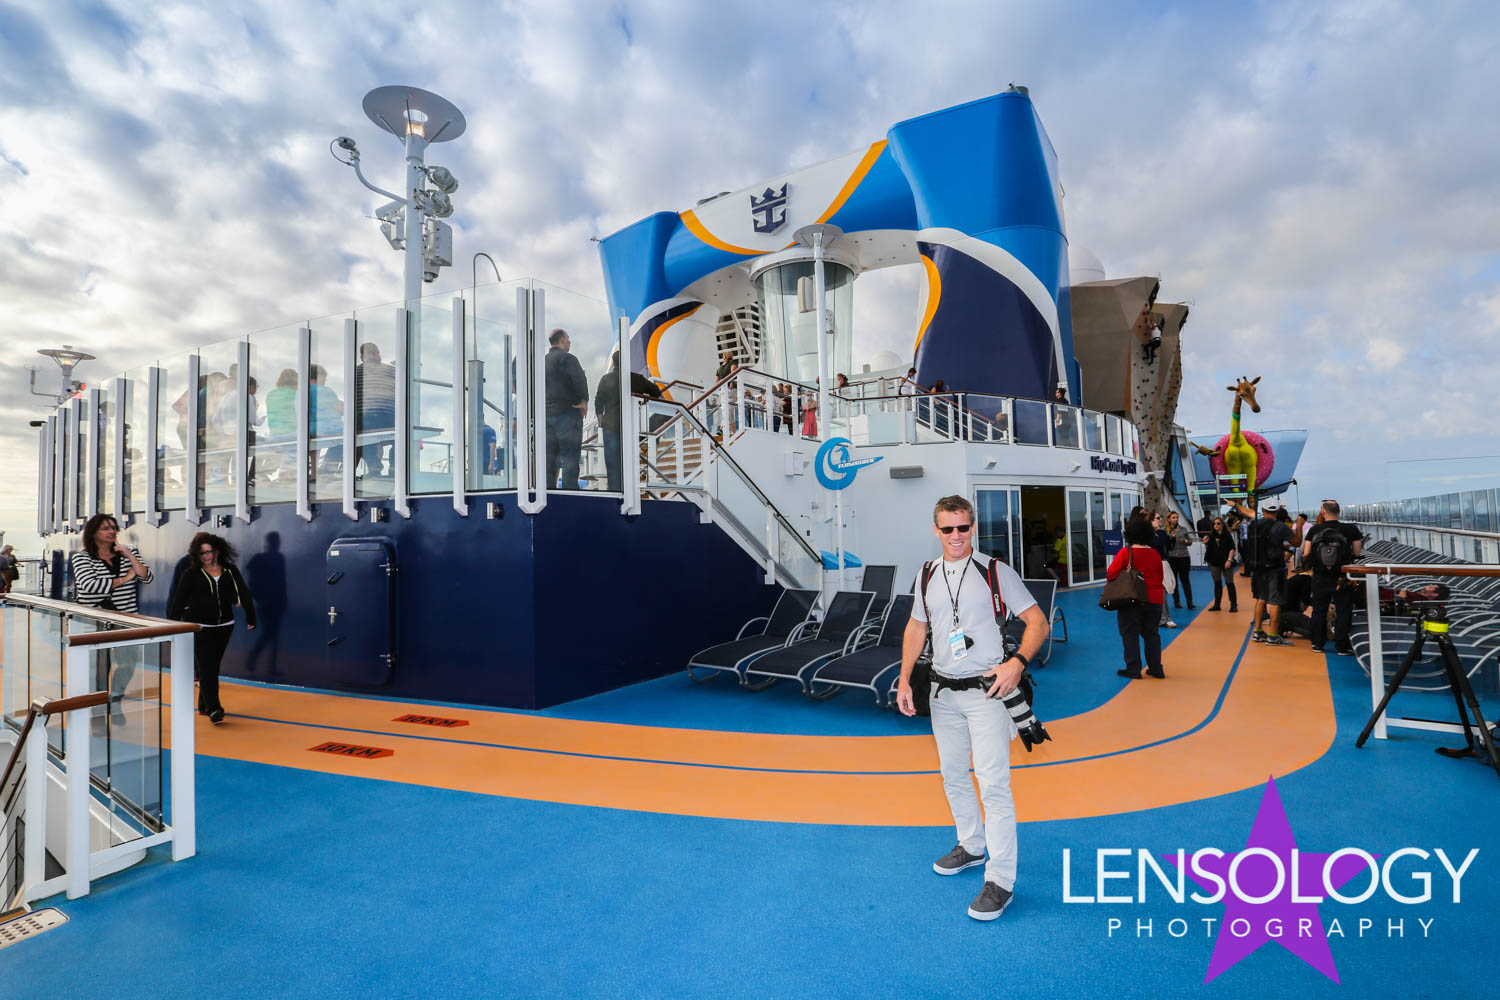 LENSOLOGY.NET - Flowrider photocall with Dancing With The Stars cast members aboard Royal Caribbeans Anthem Of The Seas, New Jersey.
All images are copyright of Lensology.net
Email: info@lensology.net
www.lensology.net